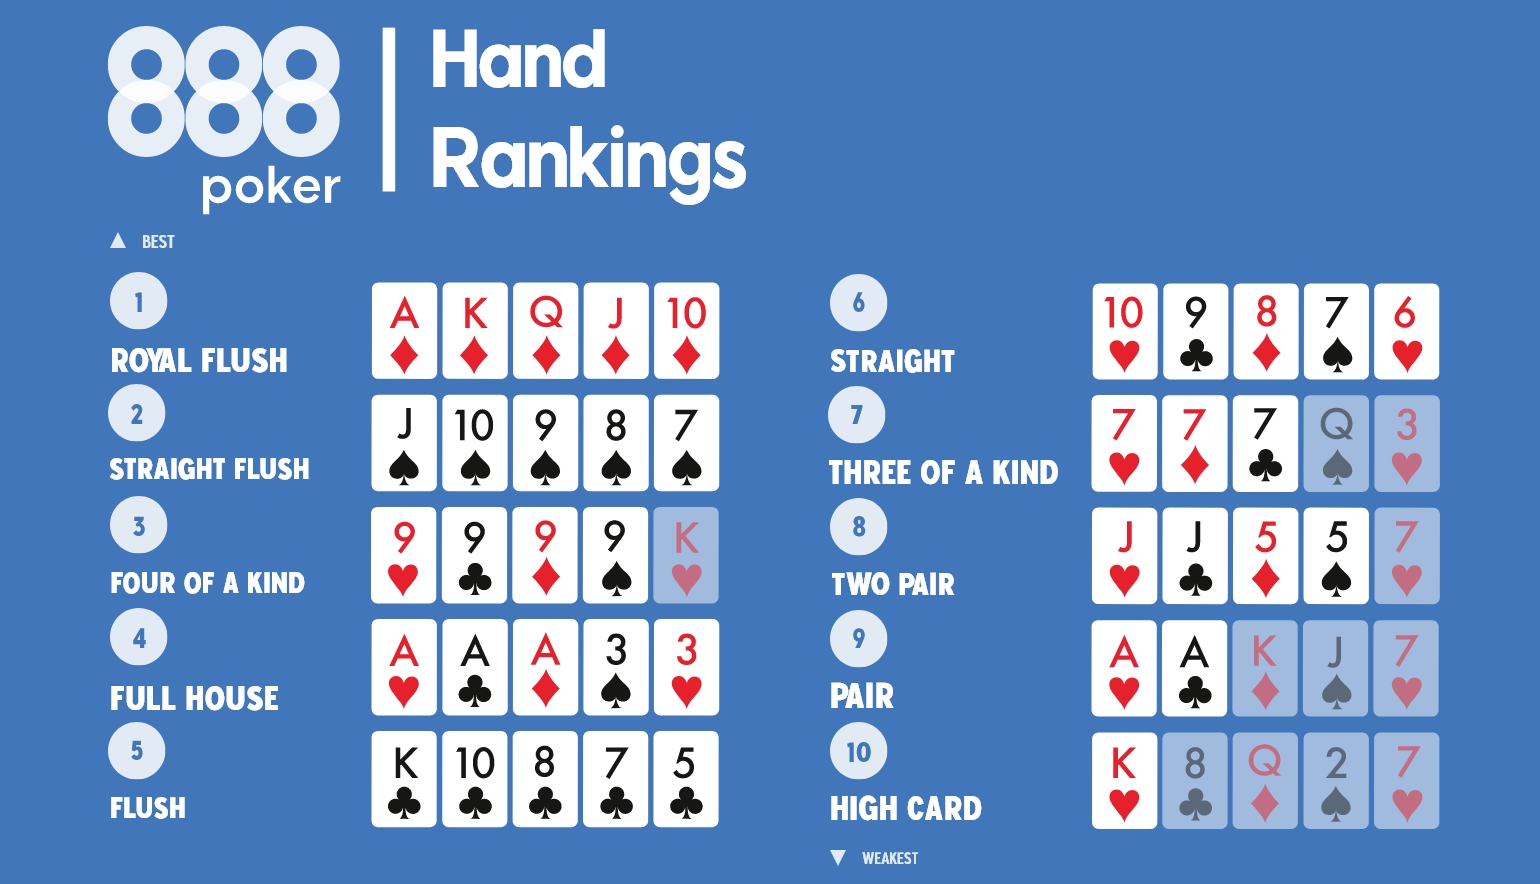 Poker Hands Ranked – What Beats What?